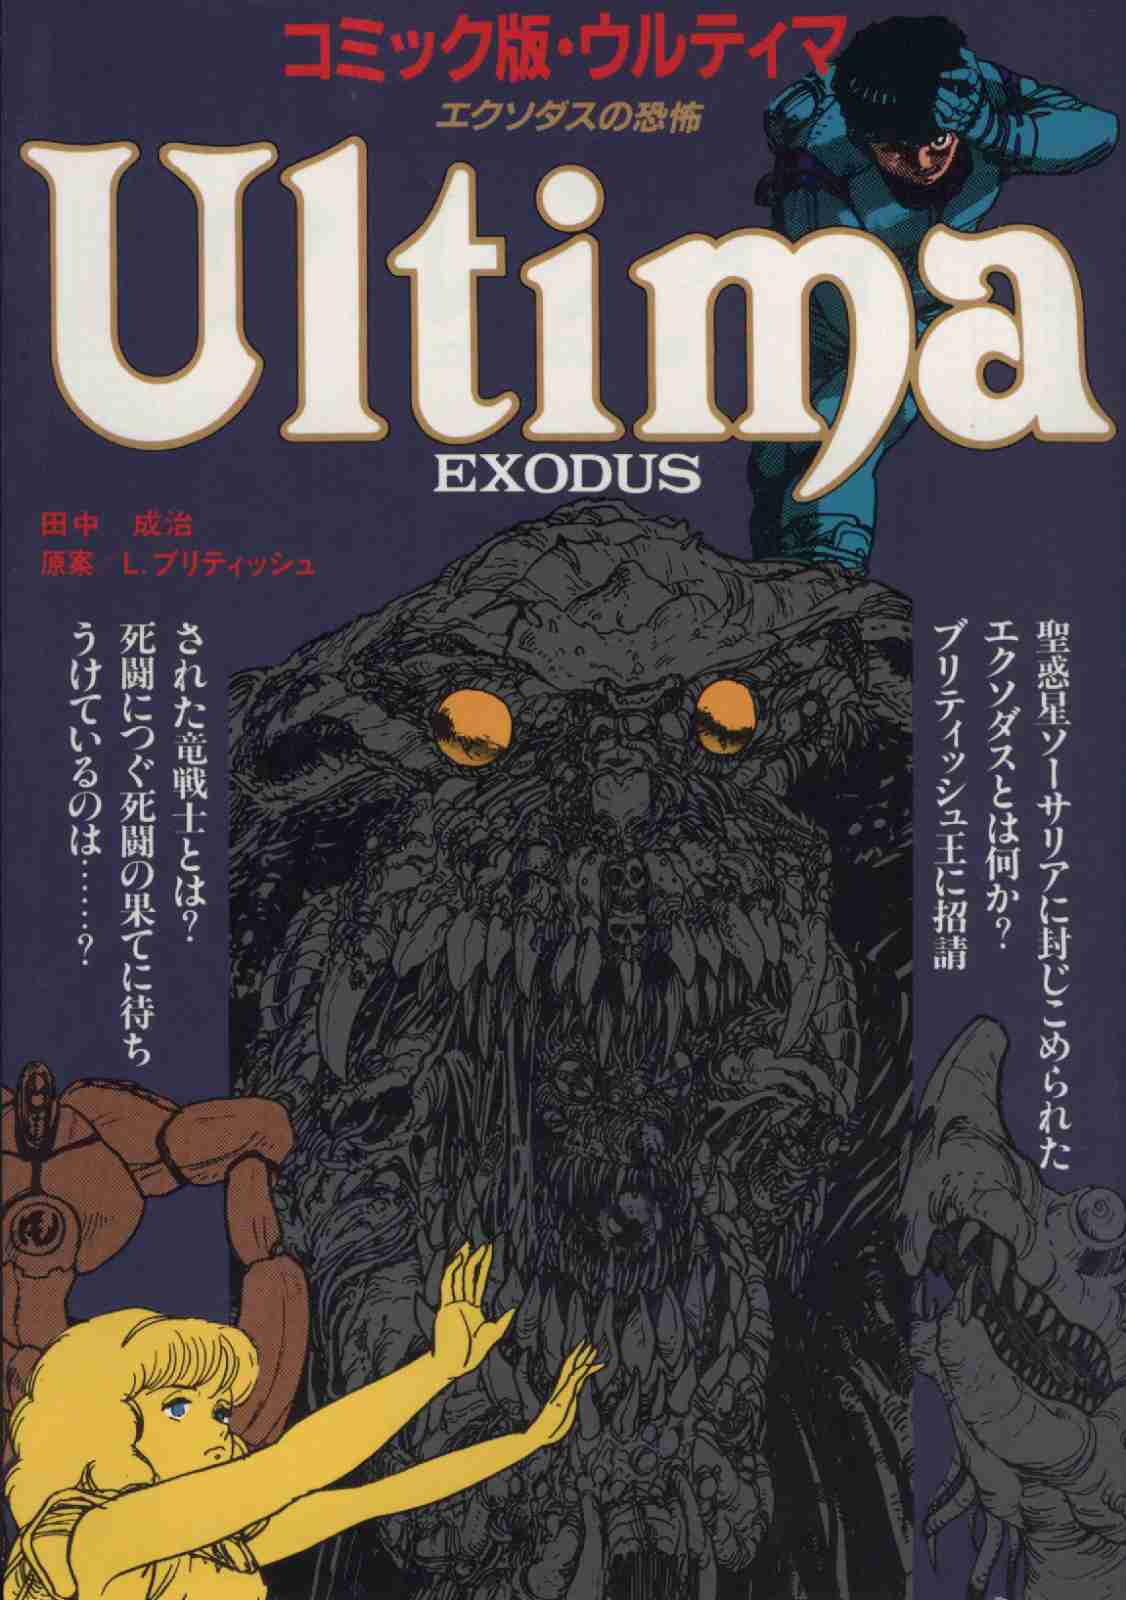 Ultima: The Terror of Exodus Vol. 1 Ch. 1.1 Prologue